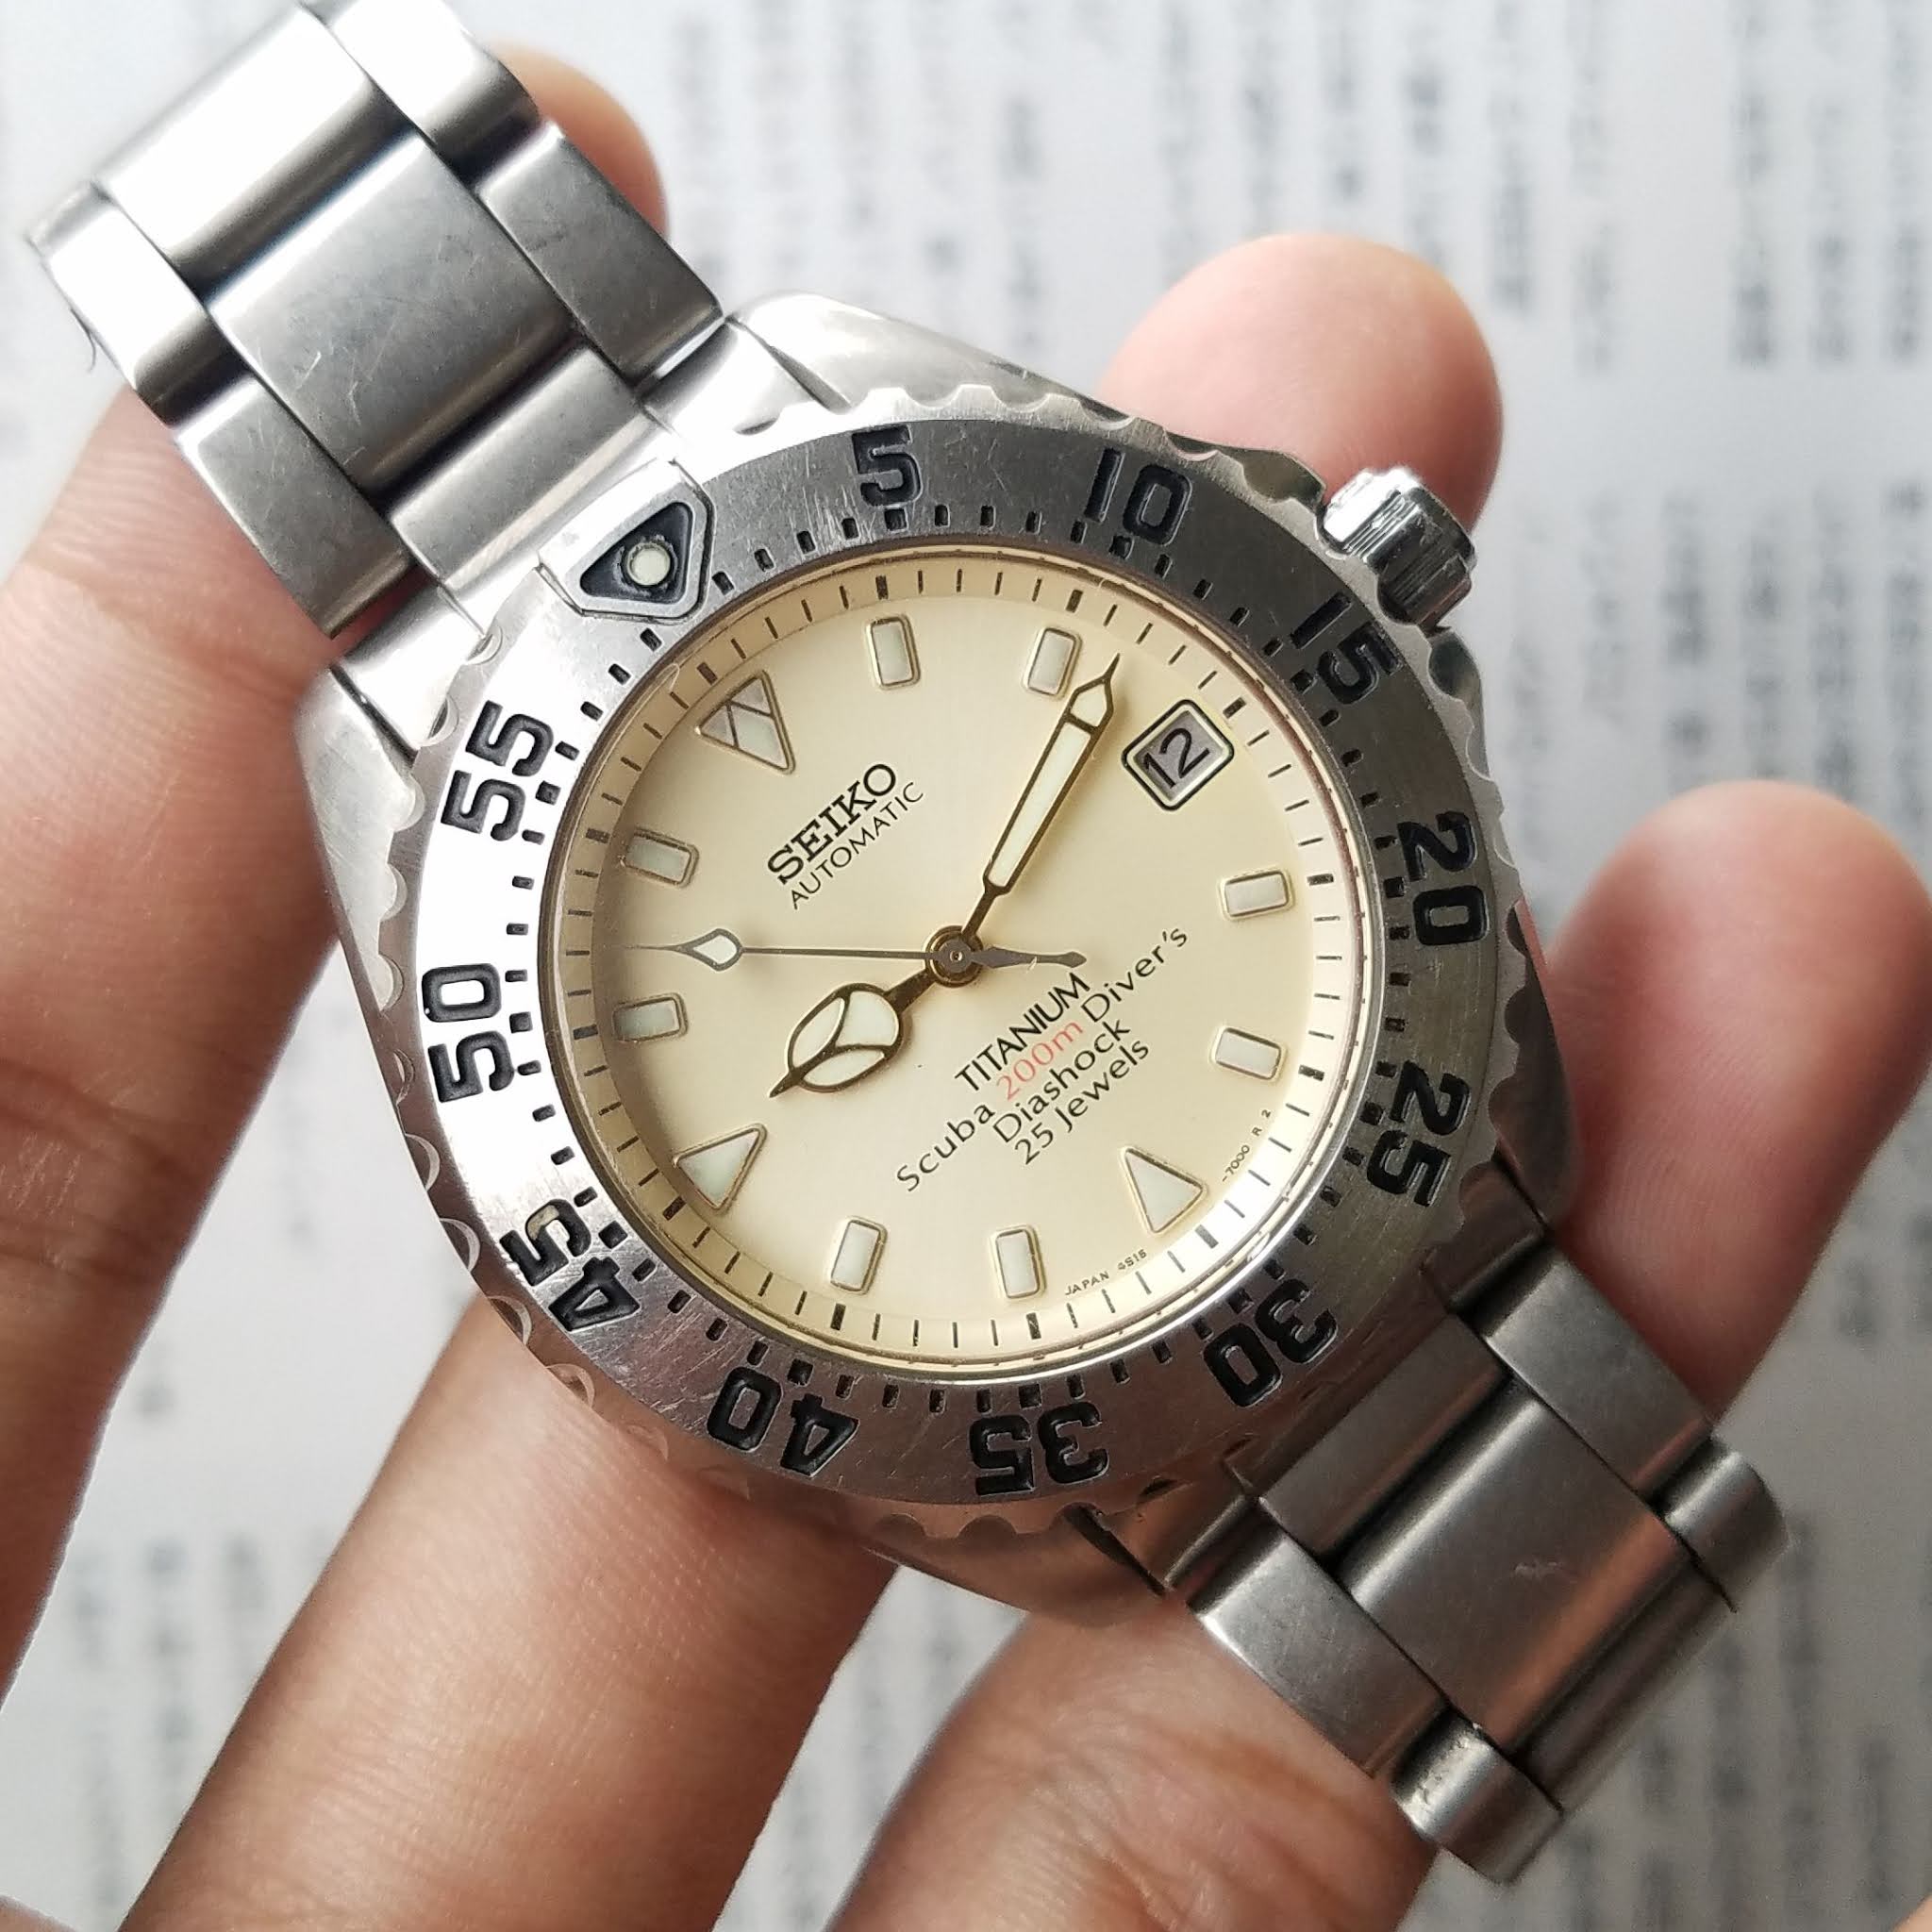 SOLD OUT)VINTAGE SEIKO AUTOMATIC TITANIUM 4S15-7000 DIVER WATCH FOR MEN'S |  MUGIPAJENG